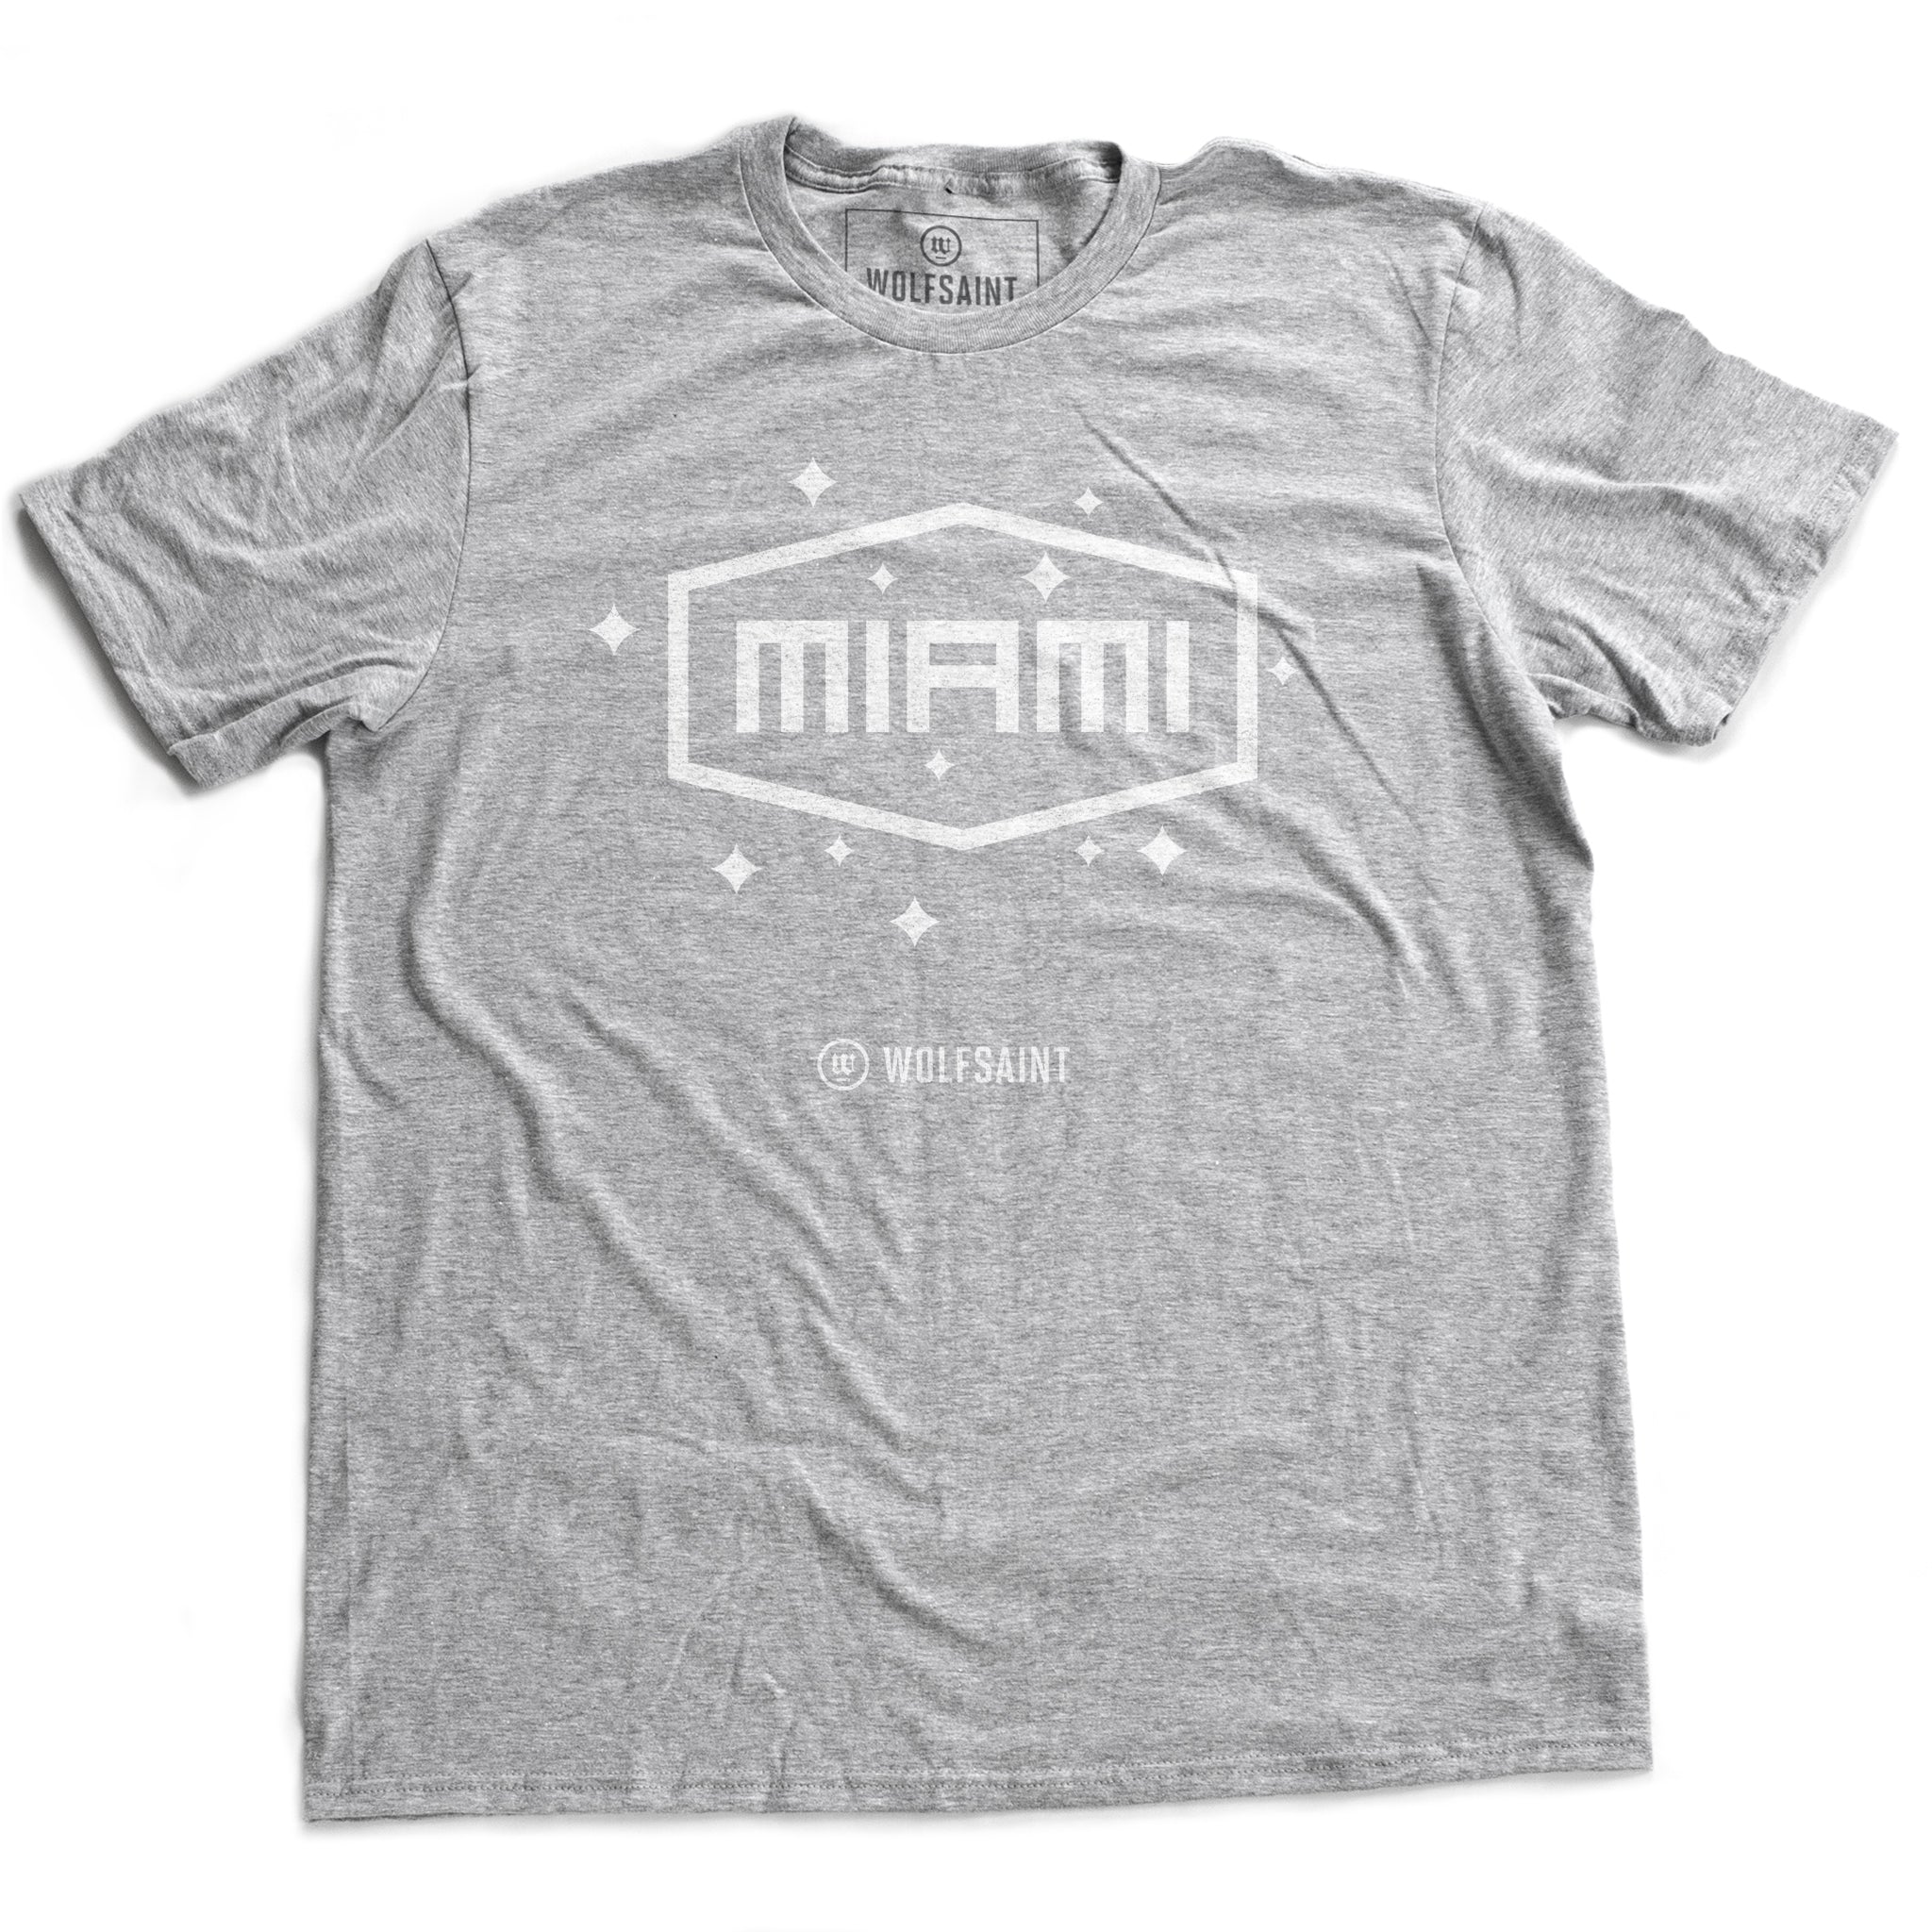 A vintage-inspired, retro fashion t-shirt in classic Heather Gray with a simple “MIAMI” graphic in a field of stars. From wolfsaint.net